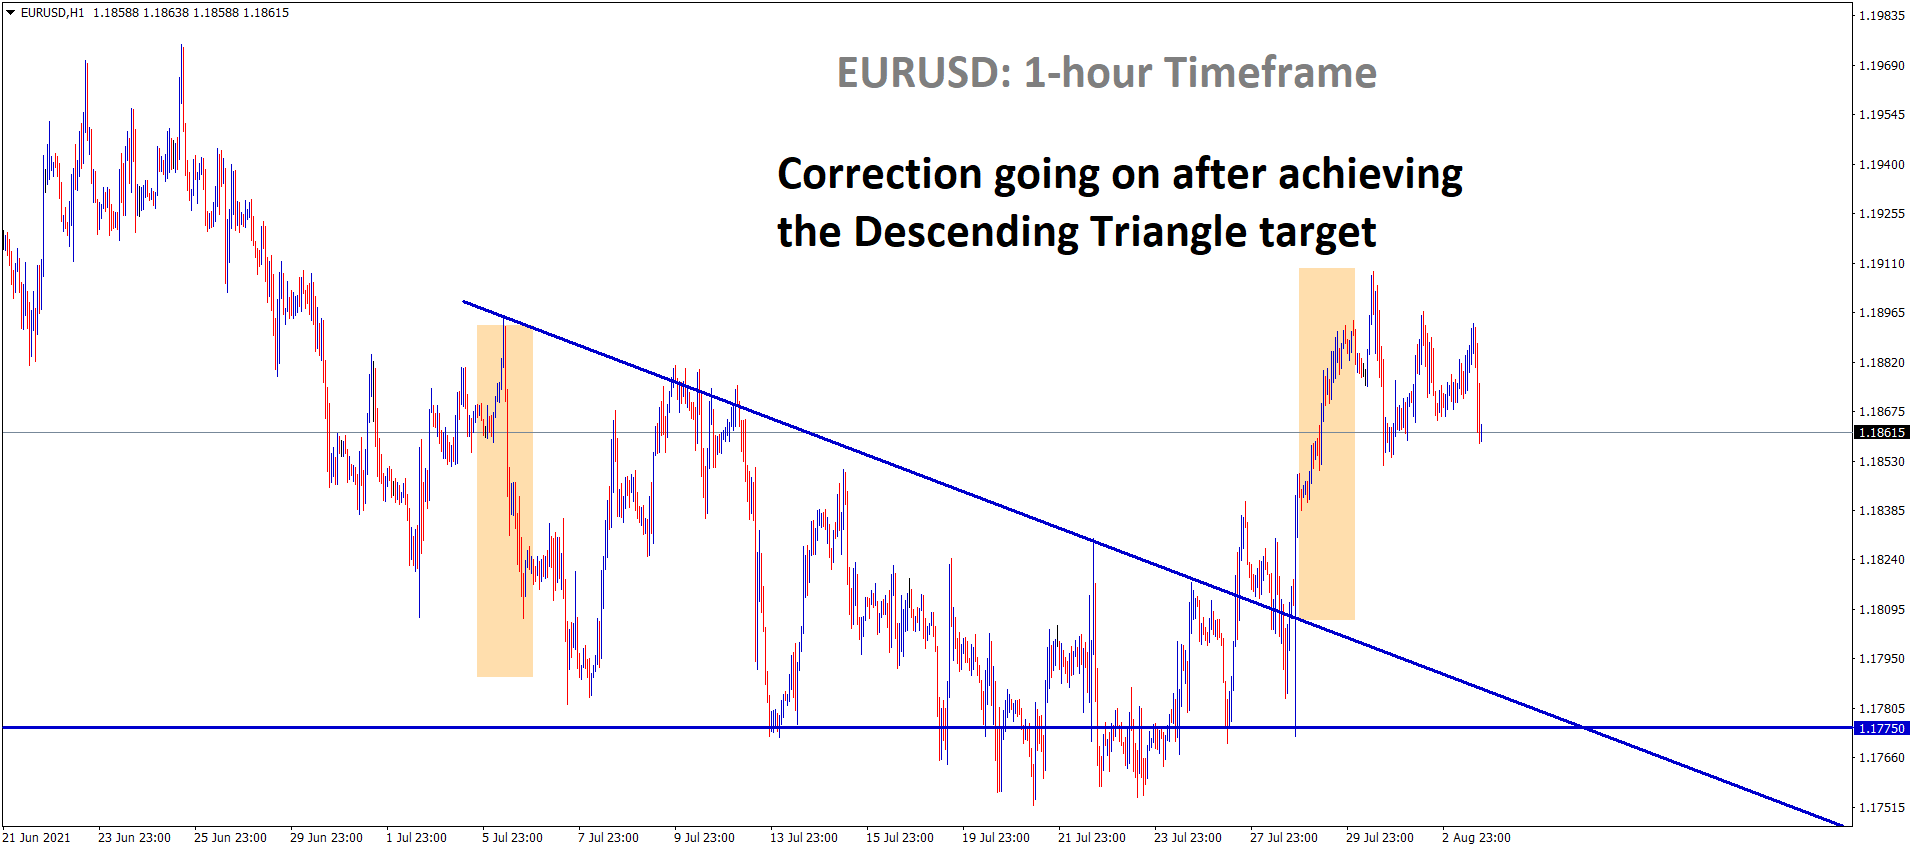 EURUSD Correction going on after achieving the descending triangle target in the 1 hour timeframe chart